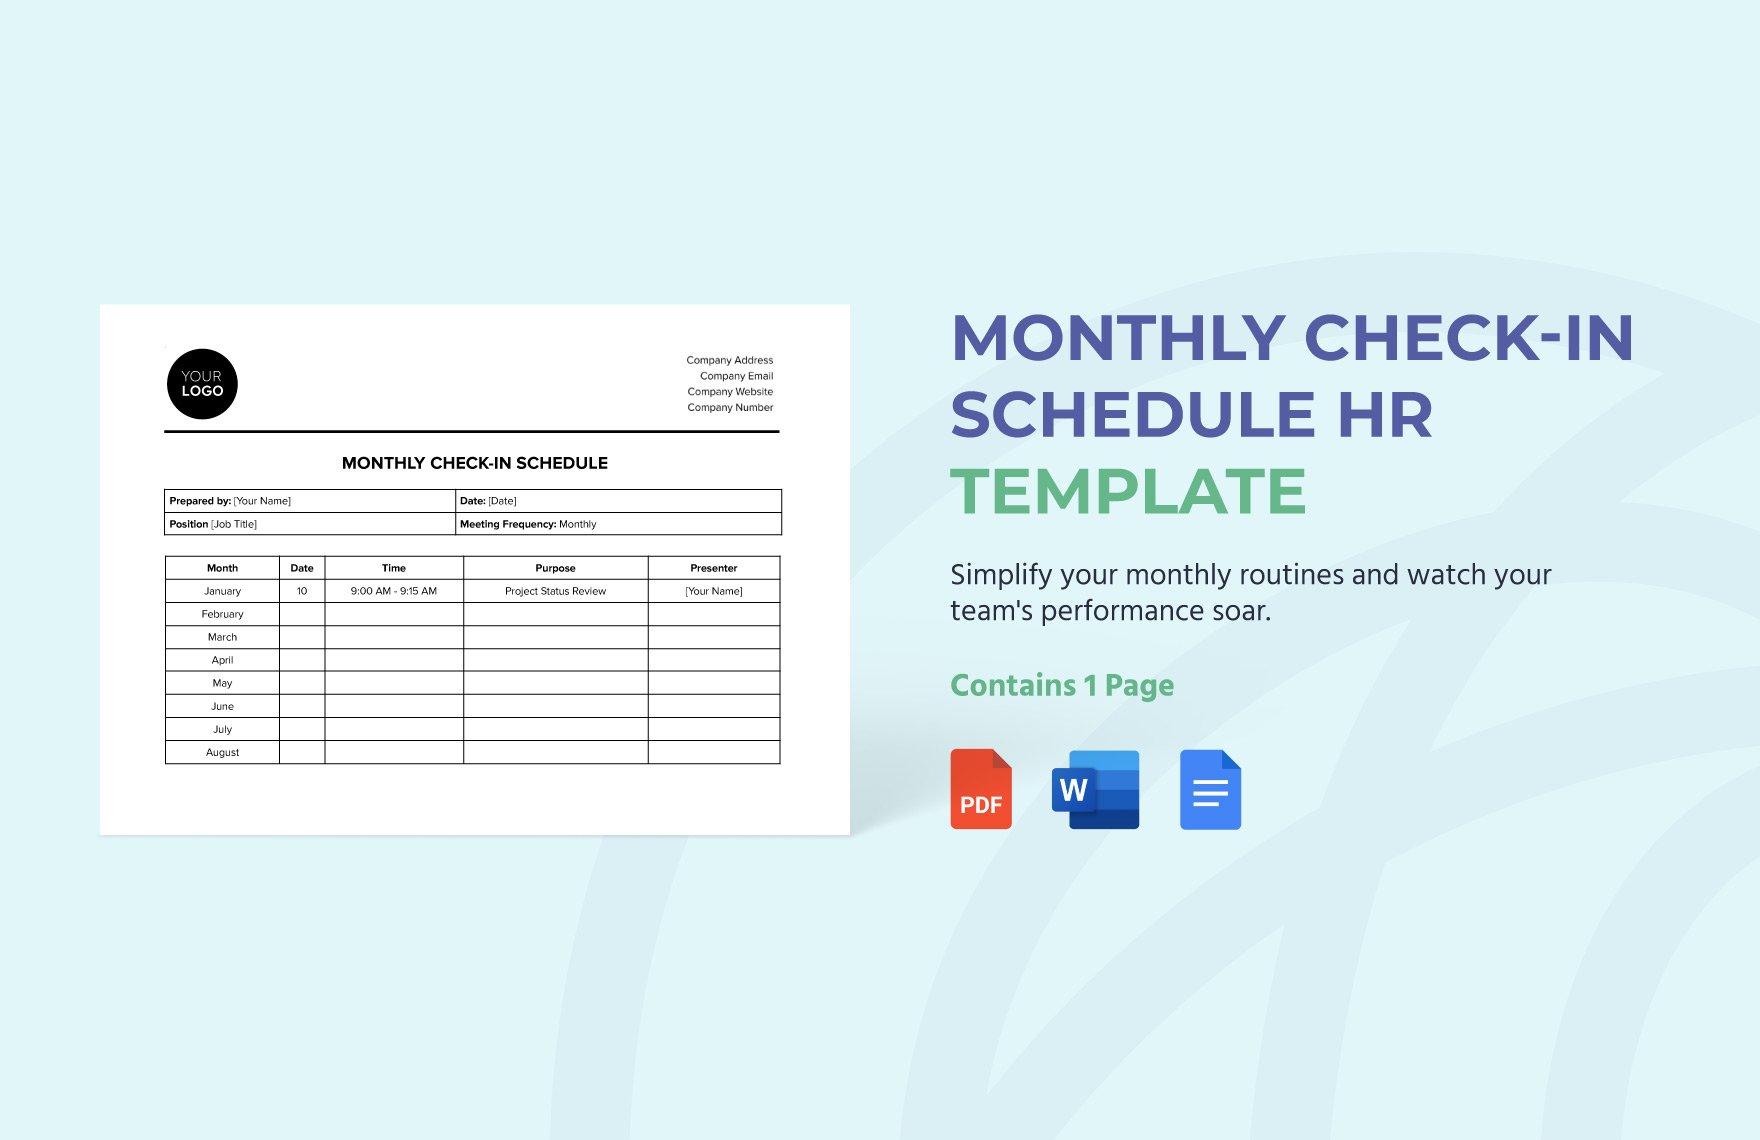 Monthly Check-in Schedule HR Template in Word, Google Docs, PDF